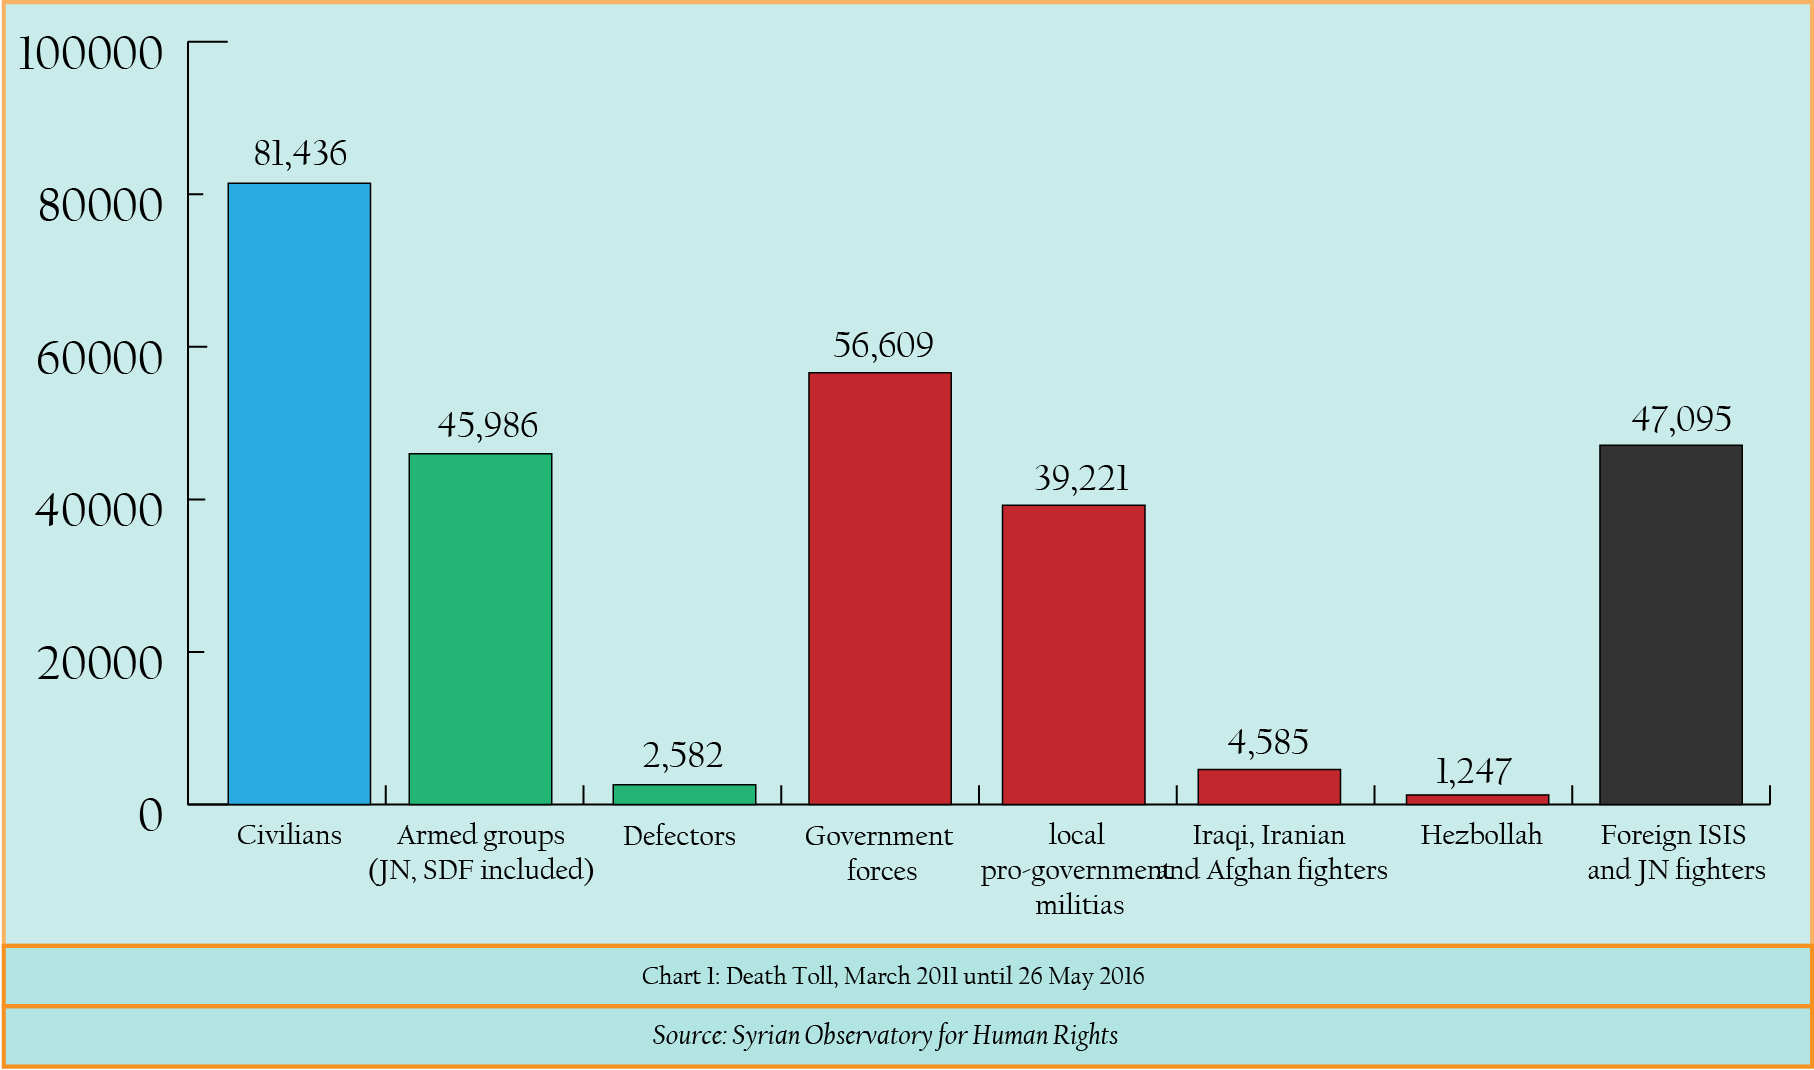 Chart 1- Death Toll, March 2011 until 26 May 2016